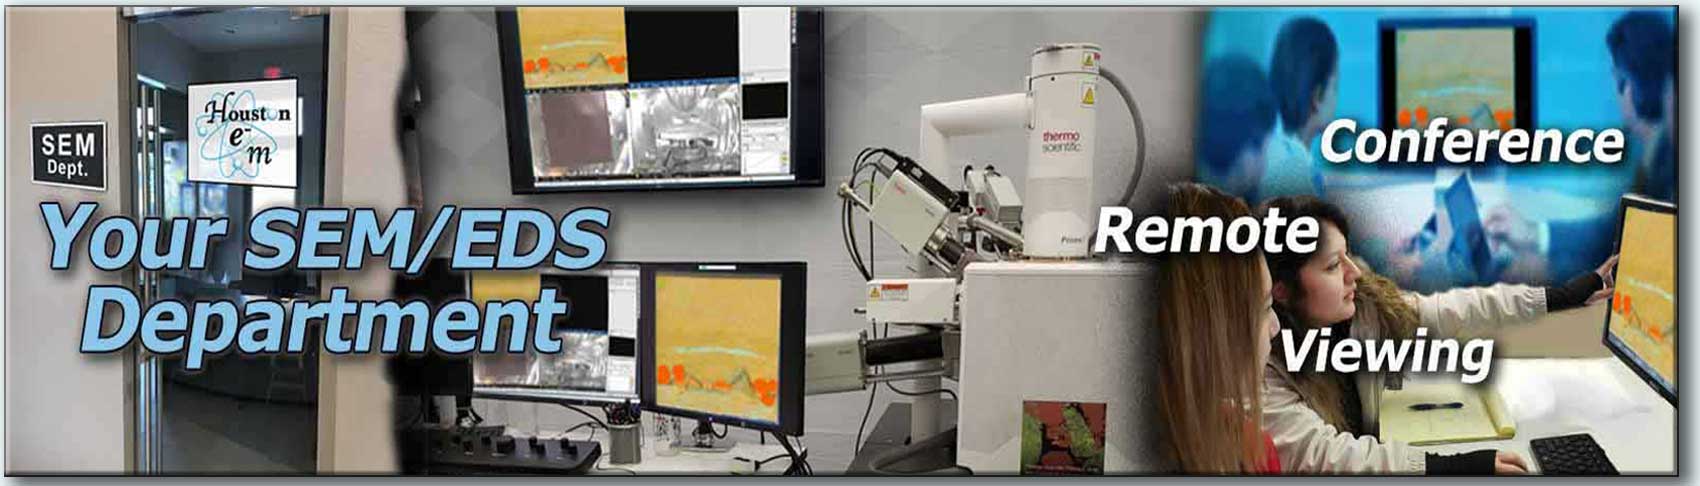 Houston Electron Microscopy's Mission is to be as your Scanning Electron Microscopy Department